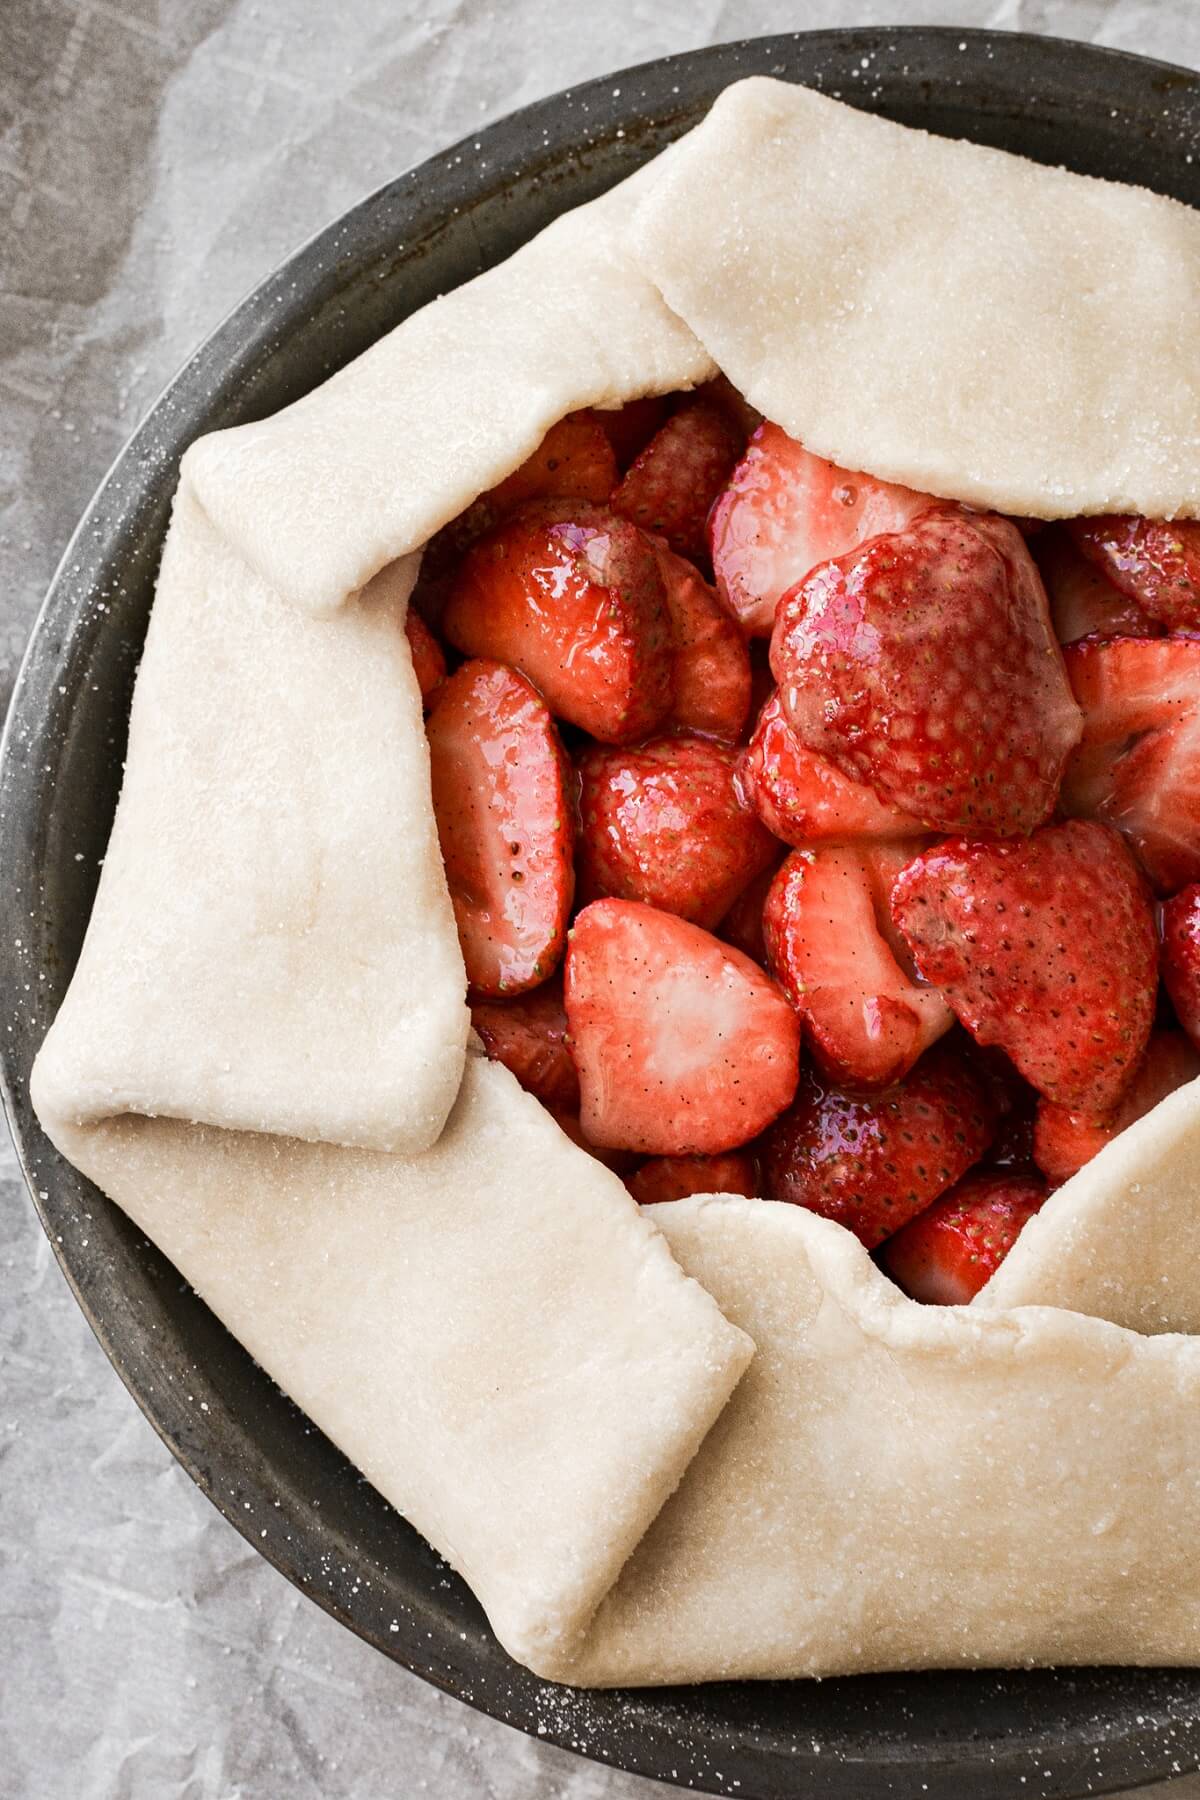 Strawberry galette ready to be baked.